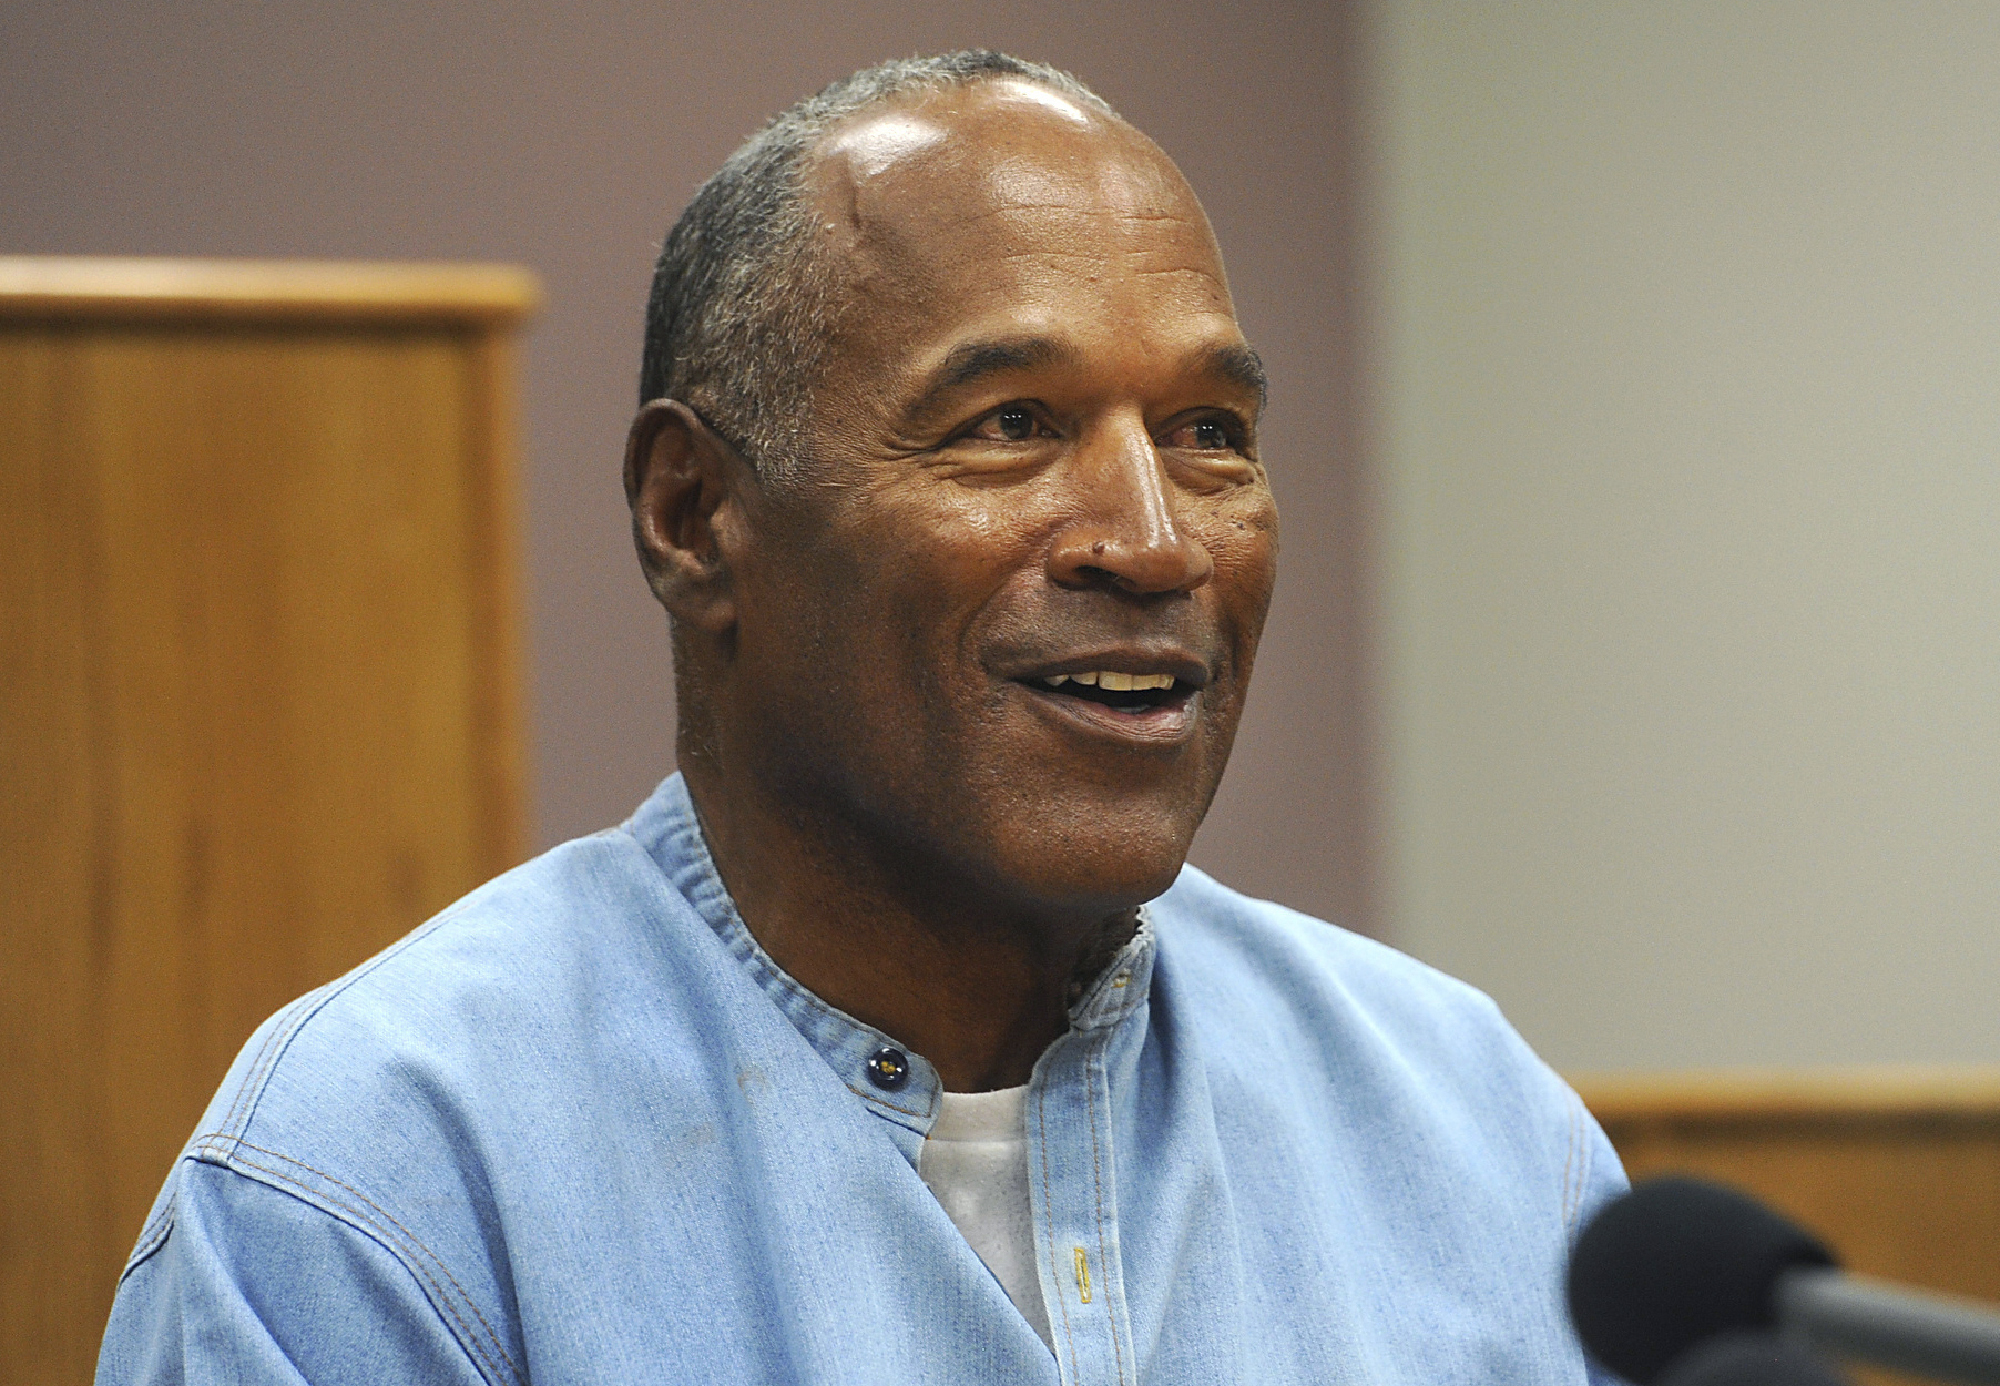 Former NFL football star O.J. Simpson appears via video for his parole hearing at the Lovelock Correctional Center in Lovelock, Nev. July 20, 2017. 